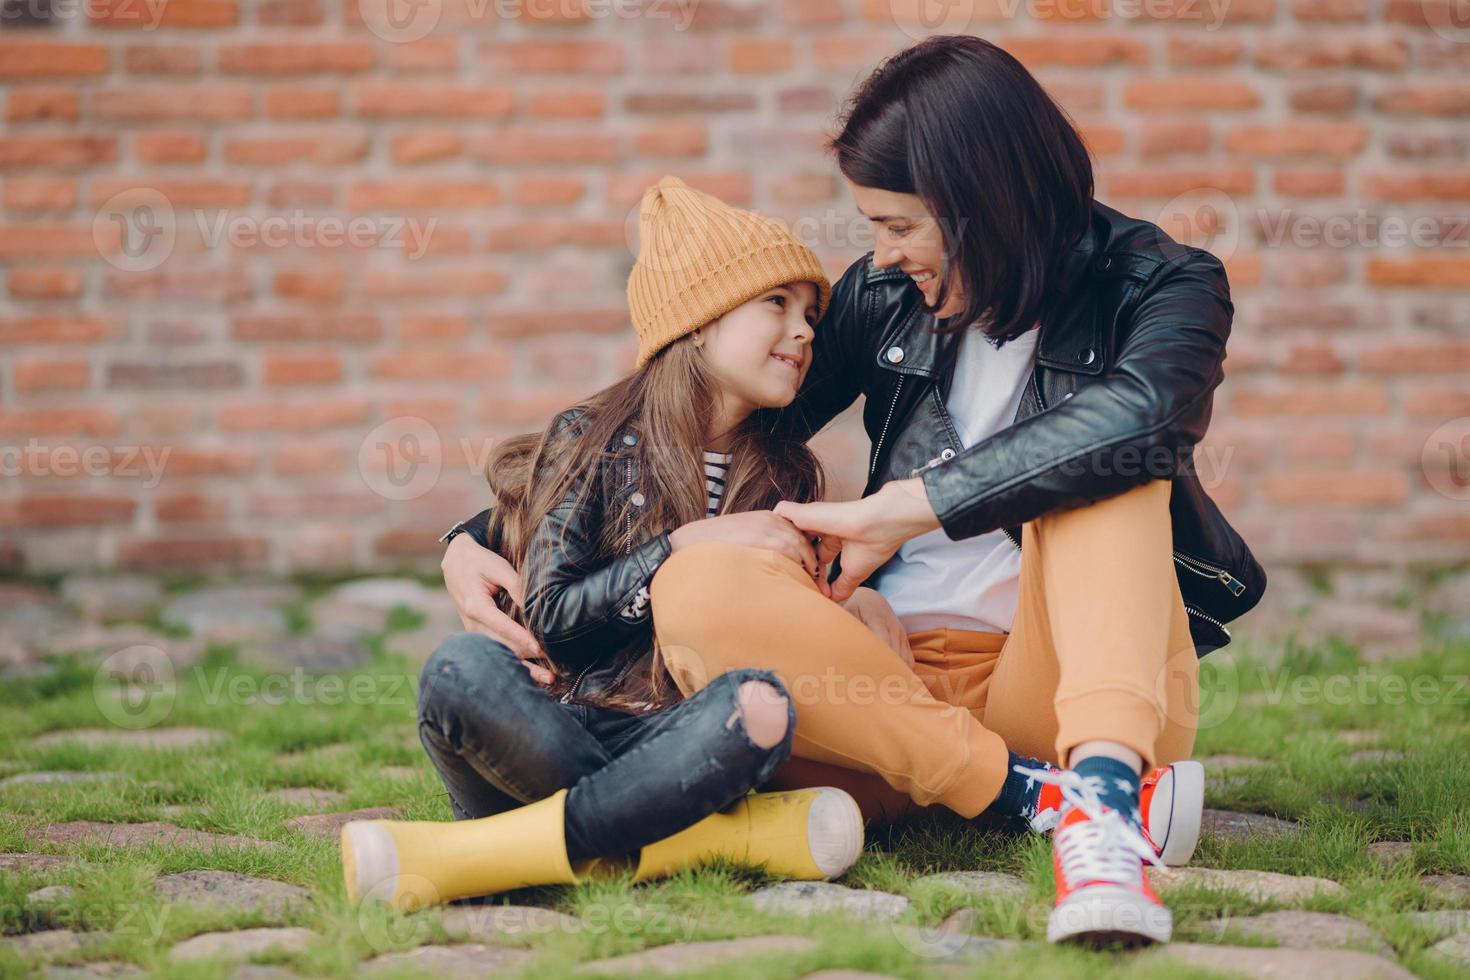 Lovely family of young mother and her small daughter embrace friendly, have good relationships, dressed in fashionable clothes, pose against brick wall outdoor. Parenthood and childhood concept photo